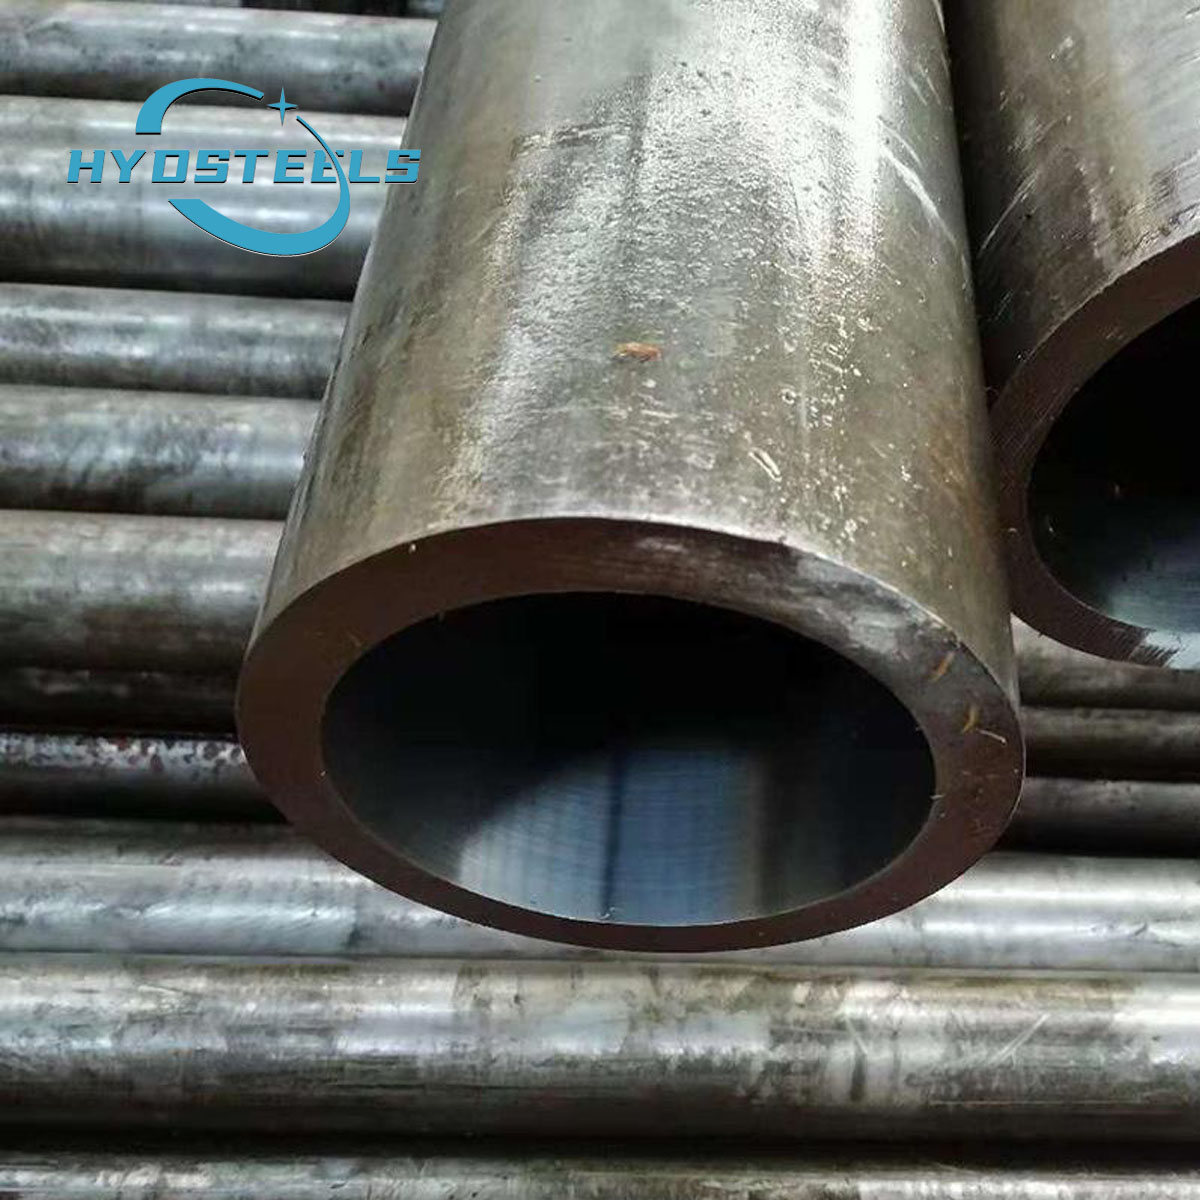 E355 Hydraulic Honed Cylinder Stainless Steel Tube for Peru supplier Manufacturer 